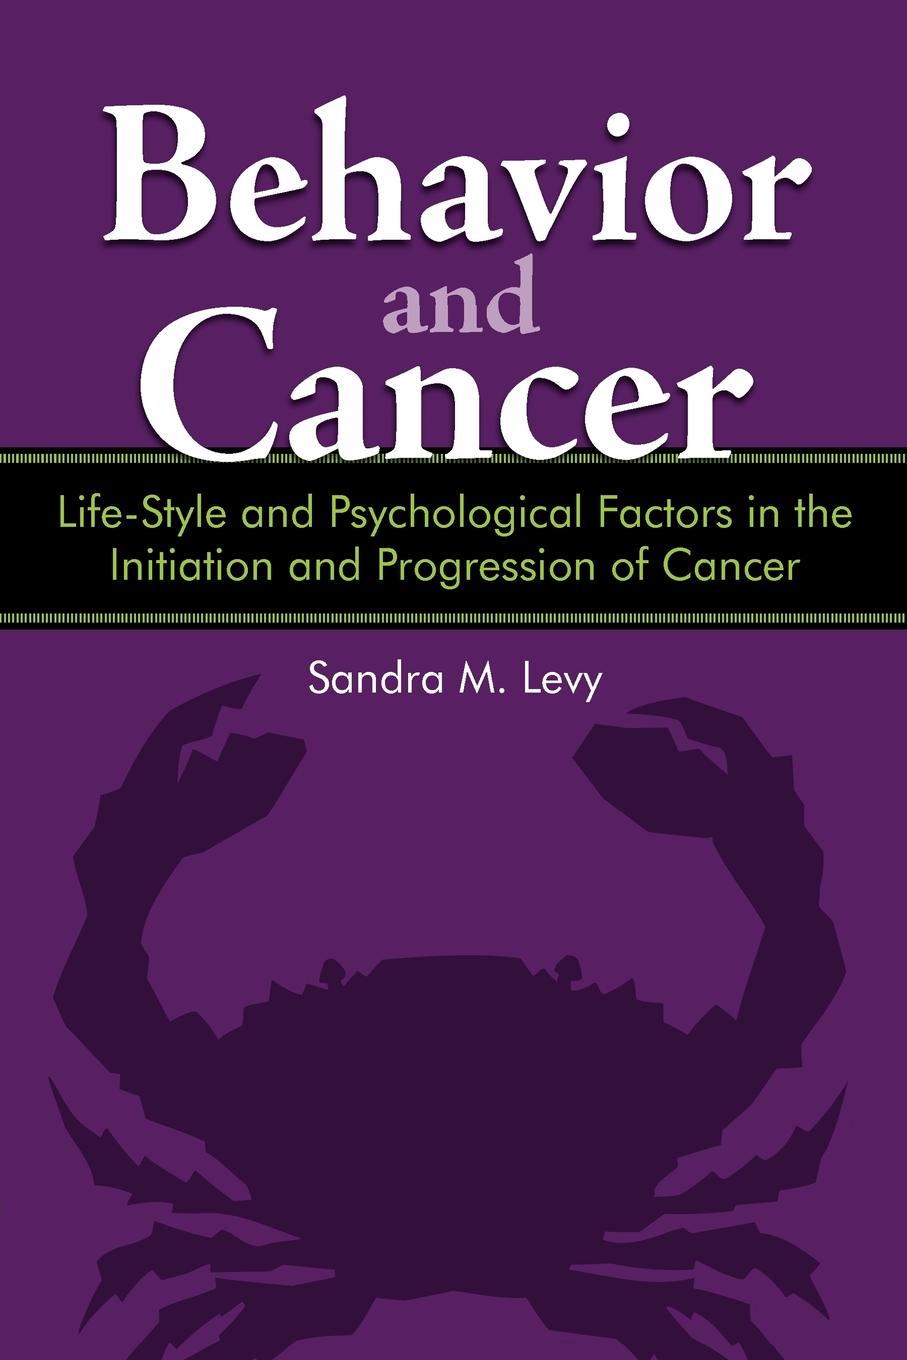 Behavior and Cancer. Life-Style and Psychological Factors in the Initiation and Progression of Cancer